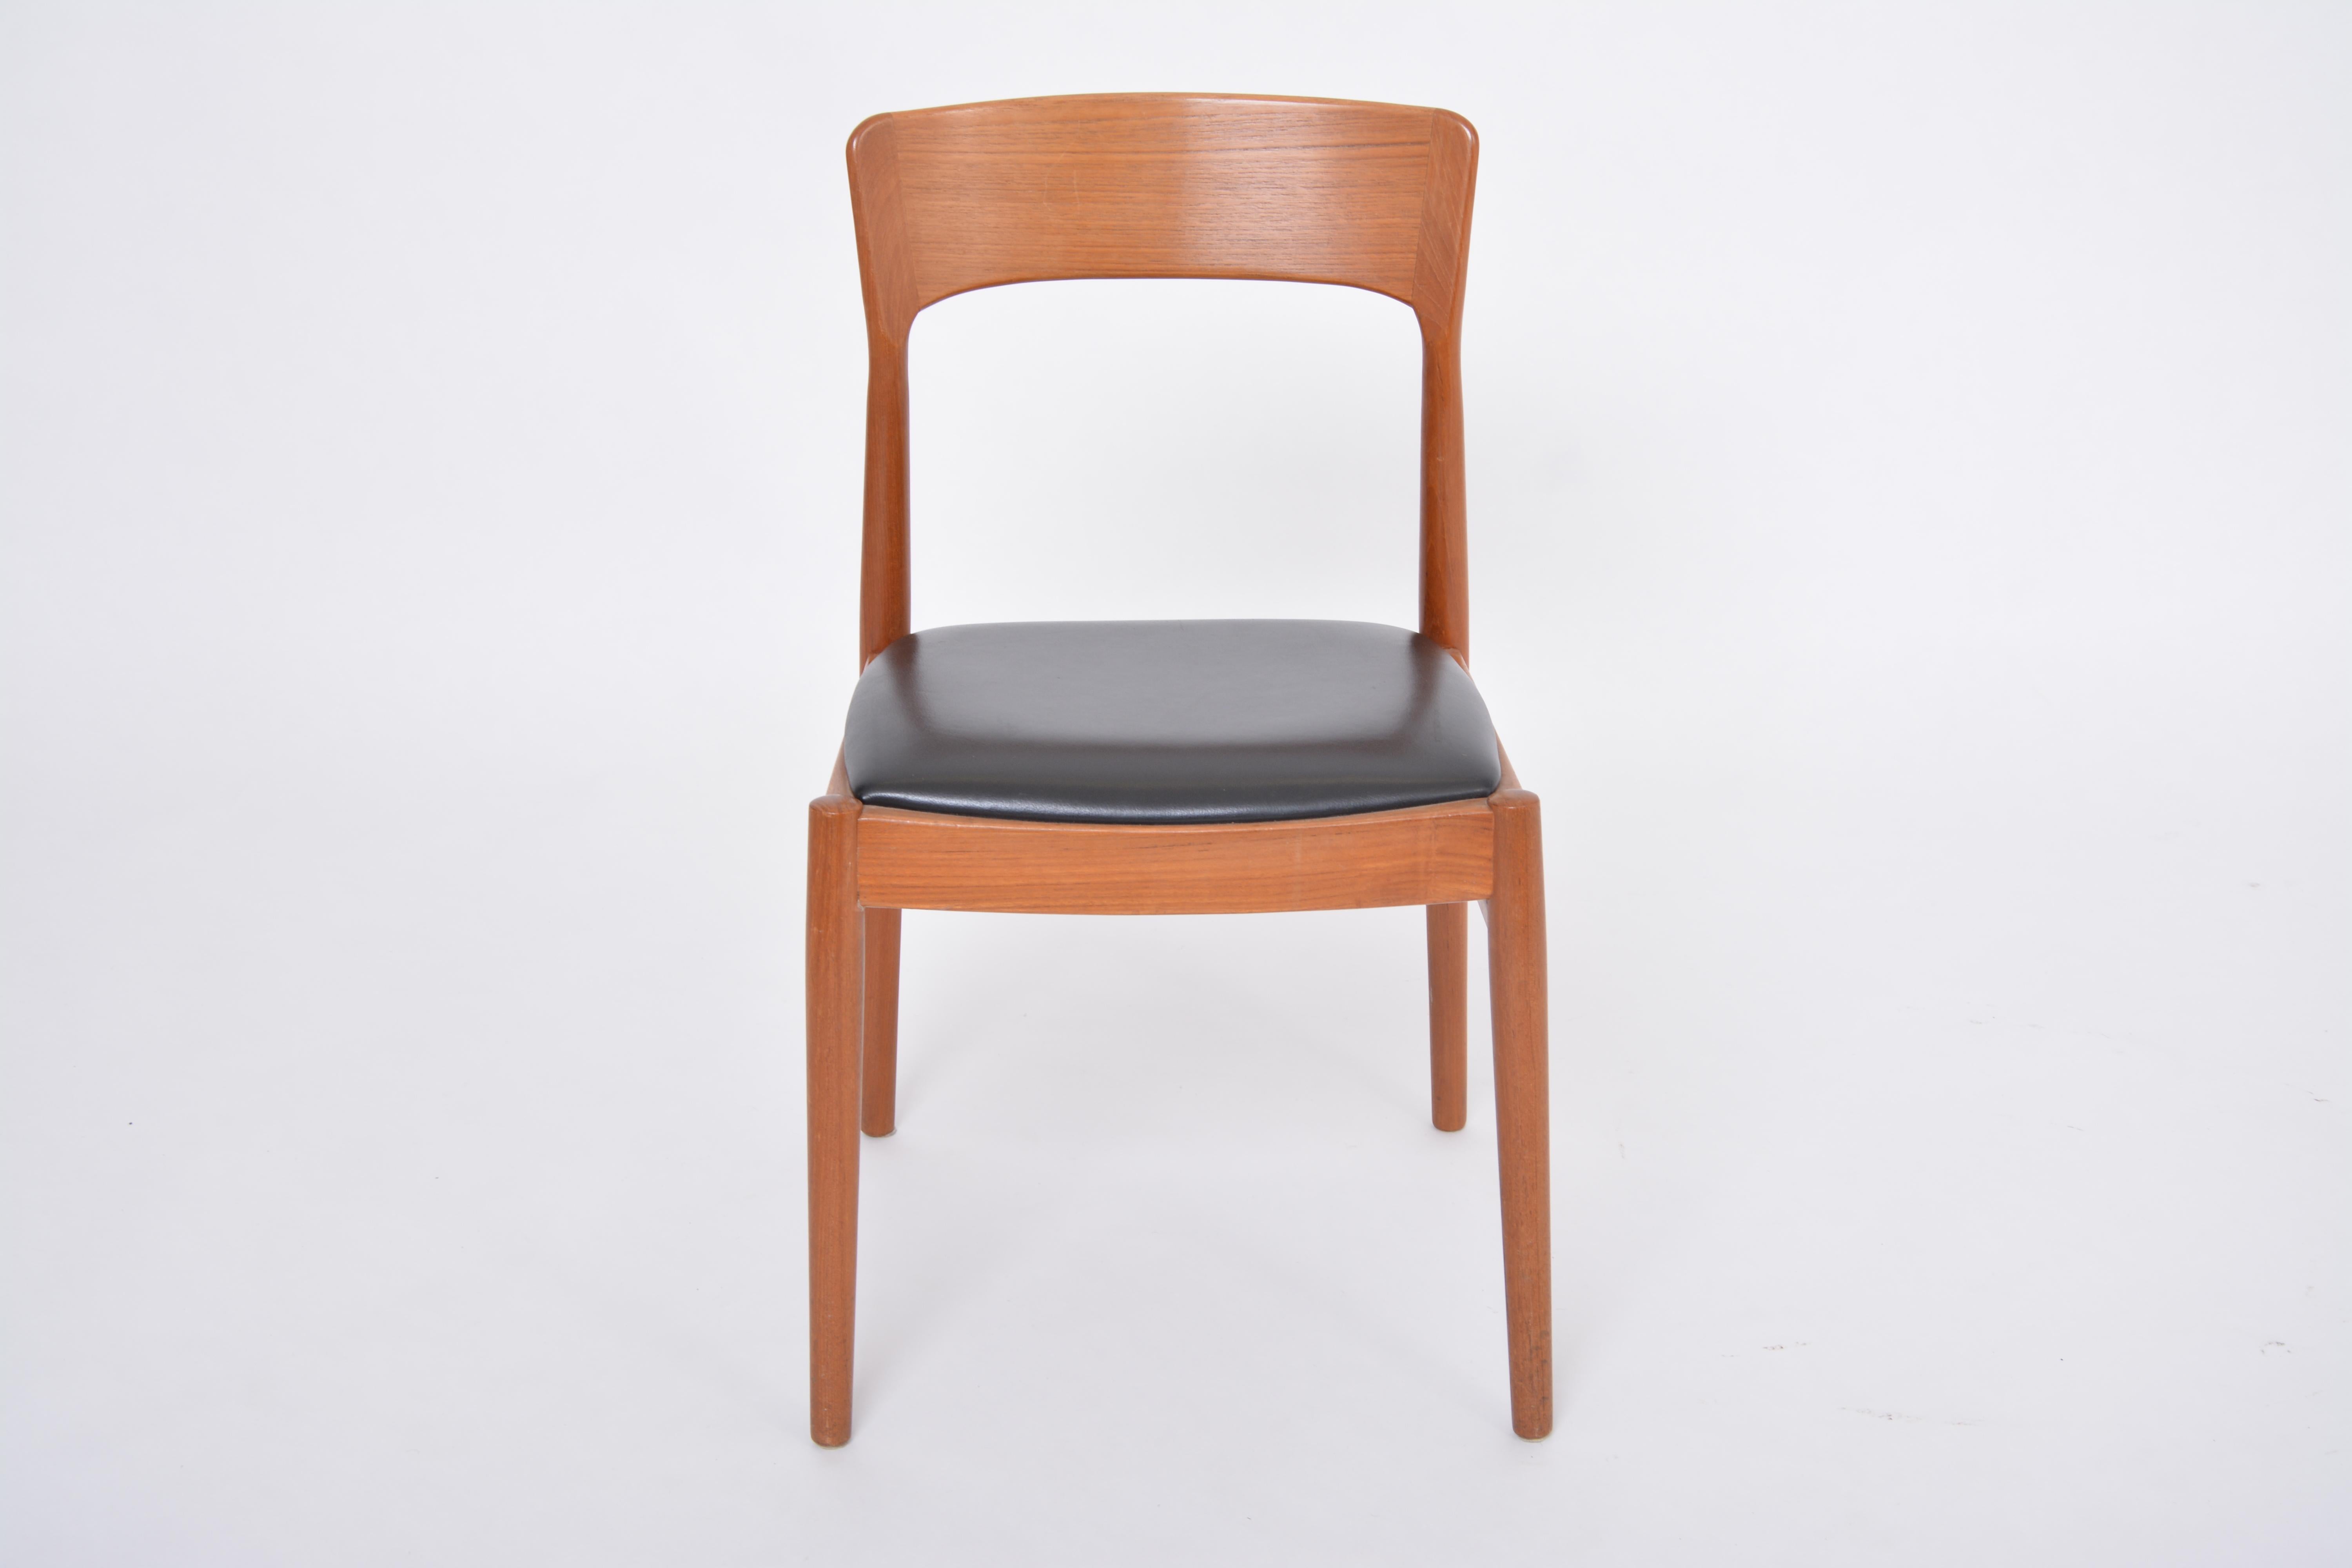 Single Danish Midcentury Modern Teak Chair
This dining or side chair was produced in Denmark, probably in the 1960s. It is made of a teak frame with a beautifully curved backrest and features a seat reupholstered in black faux leather. The generous